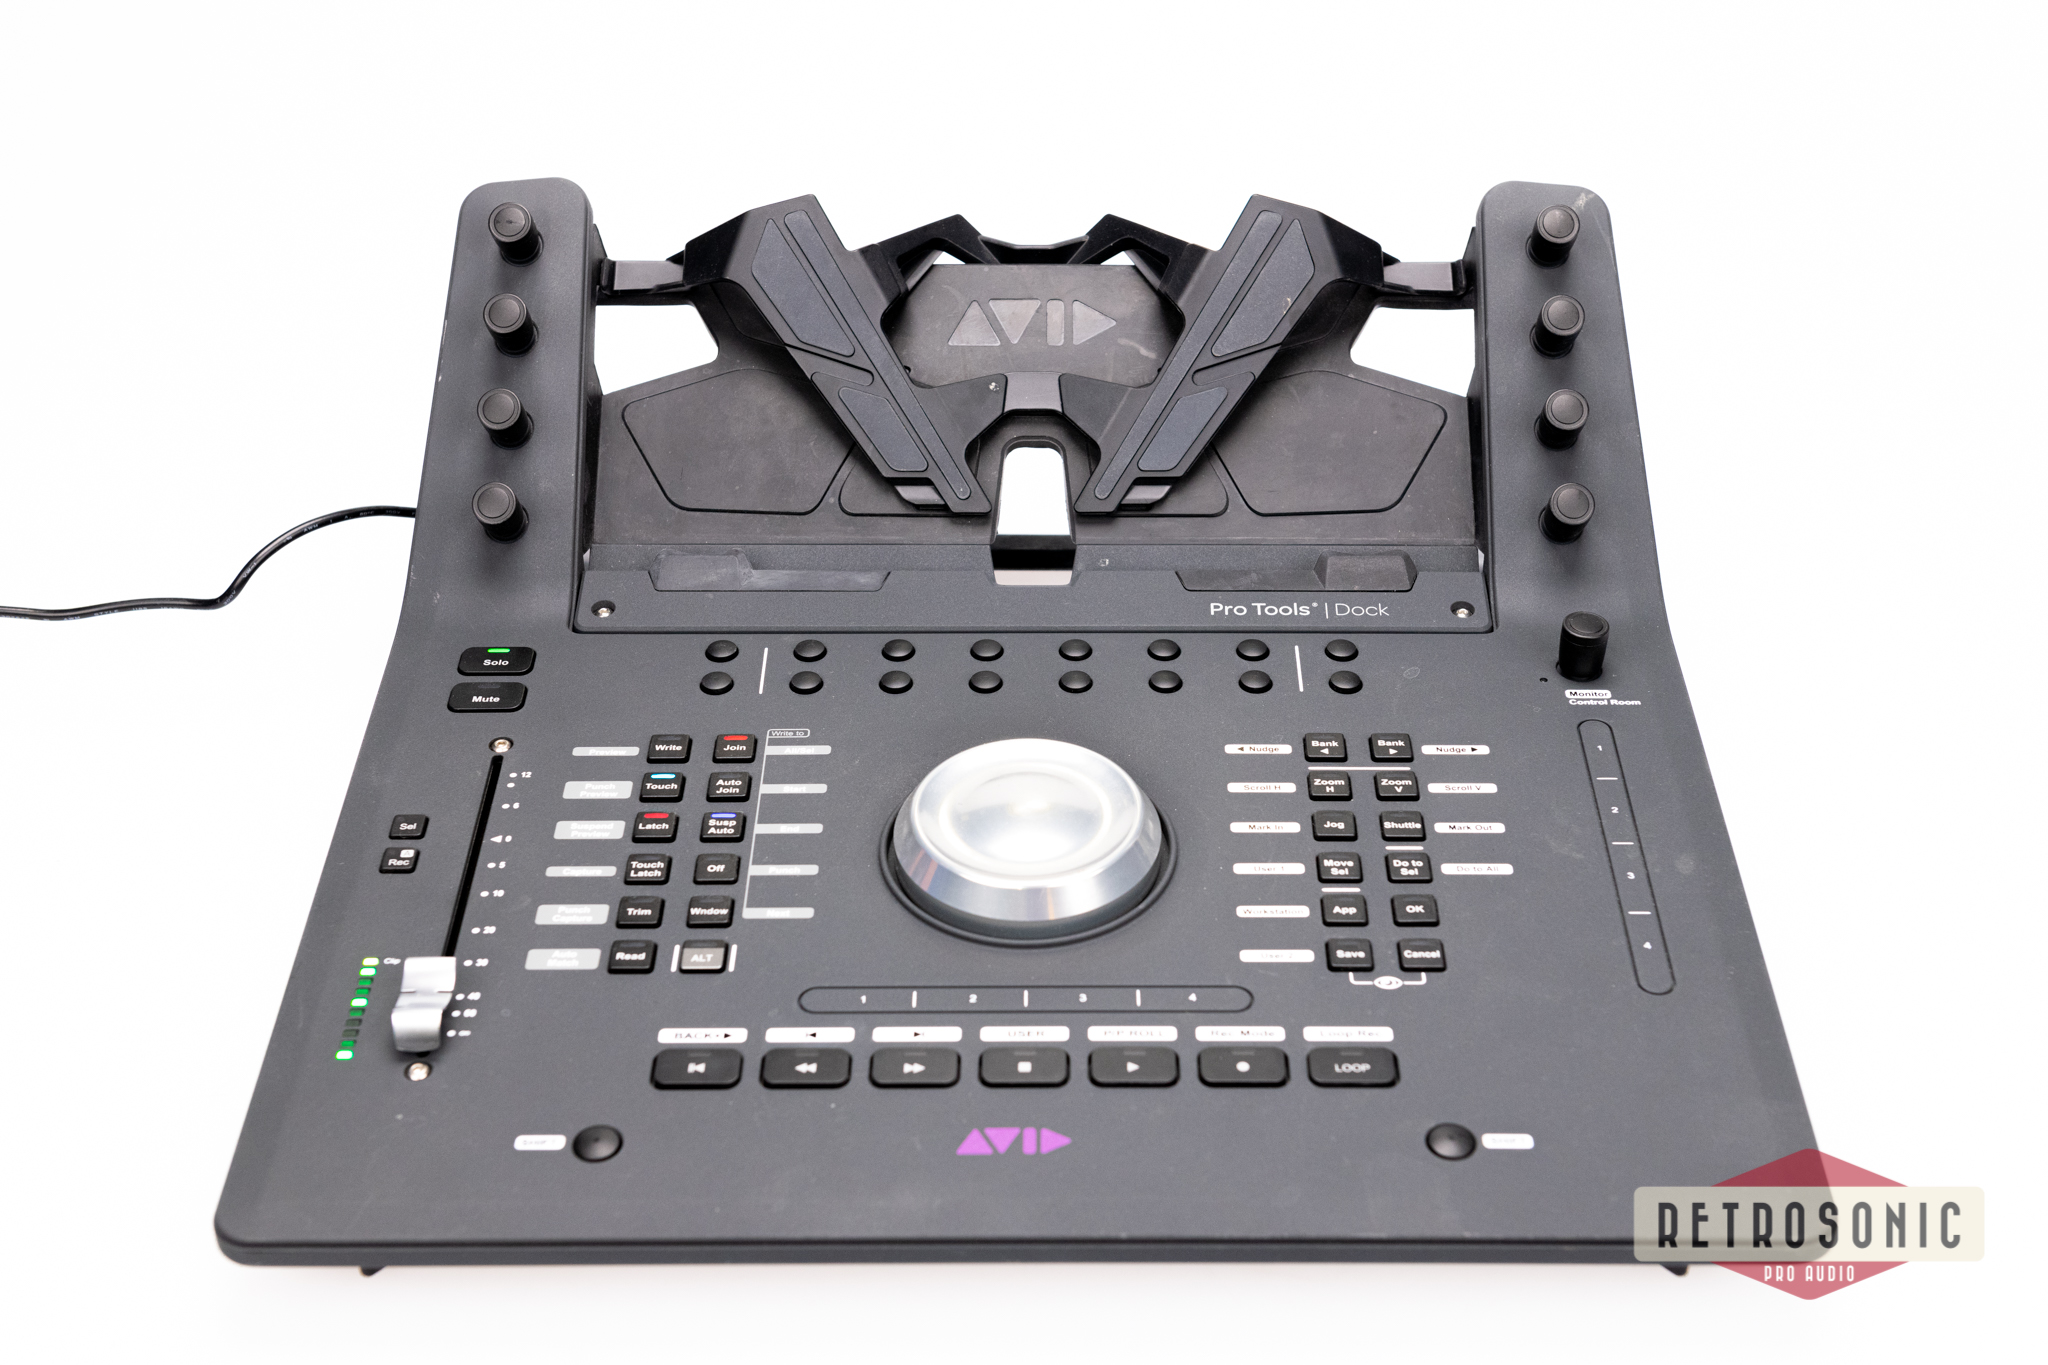 Avid Pro Tools Dock Ethernet Control Surface